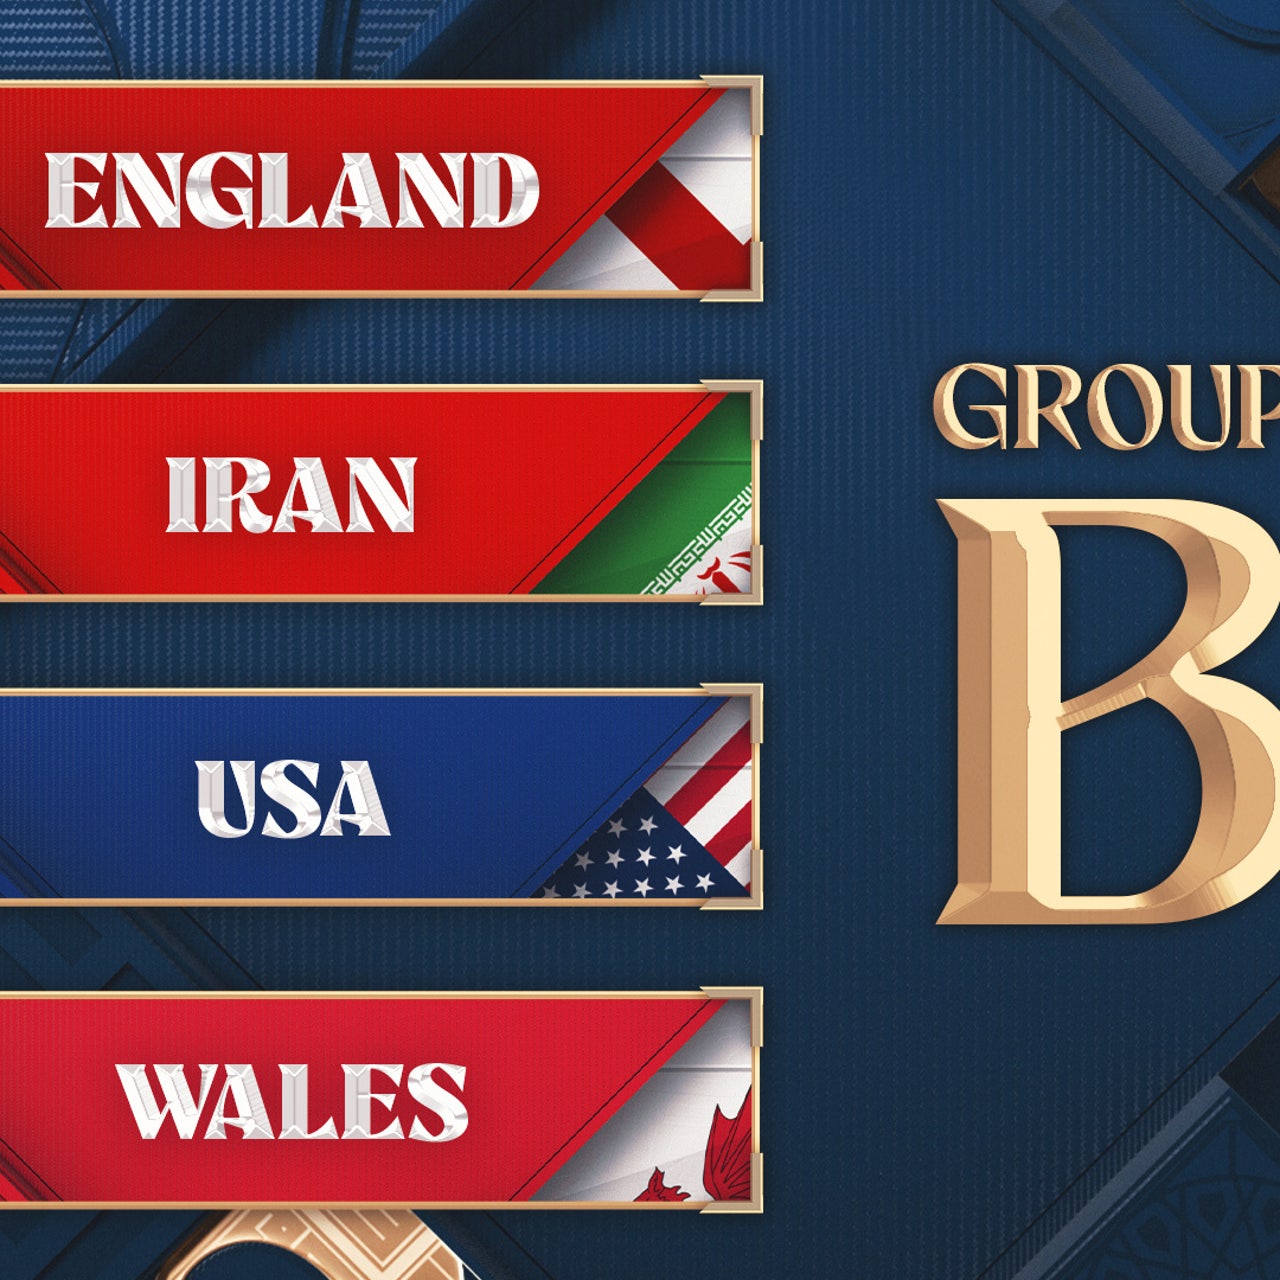 World Cup tiebreakers: Rules and scenarios to advance from group